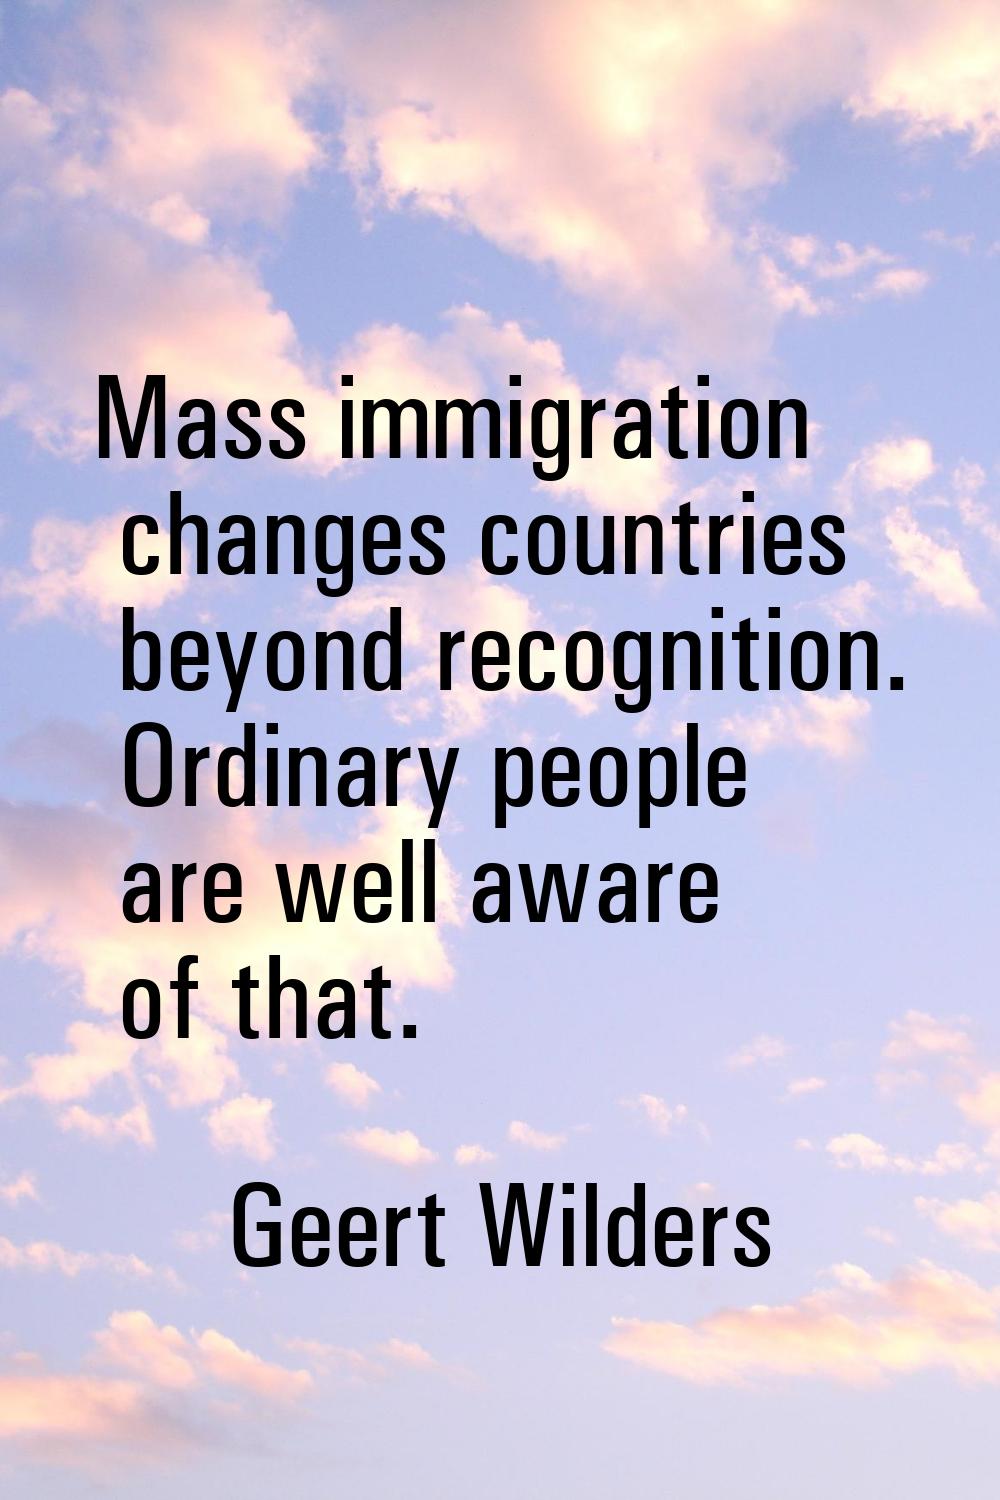 Mass immigration changes countries beyond recognition. Ordinary people are well aware of that.